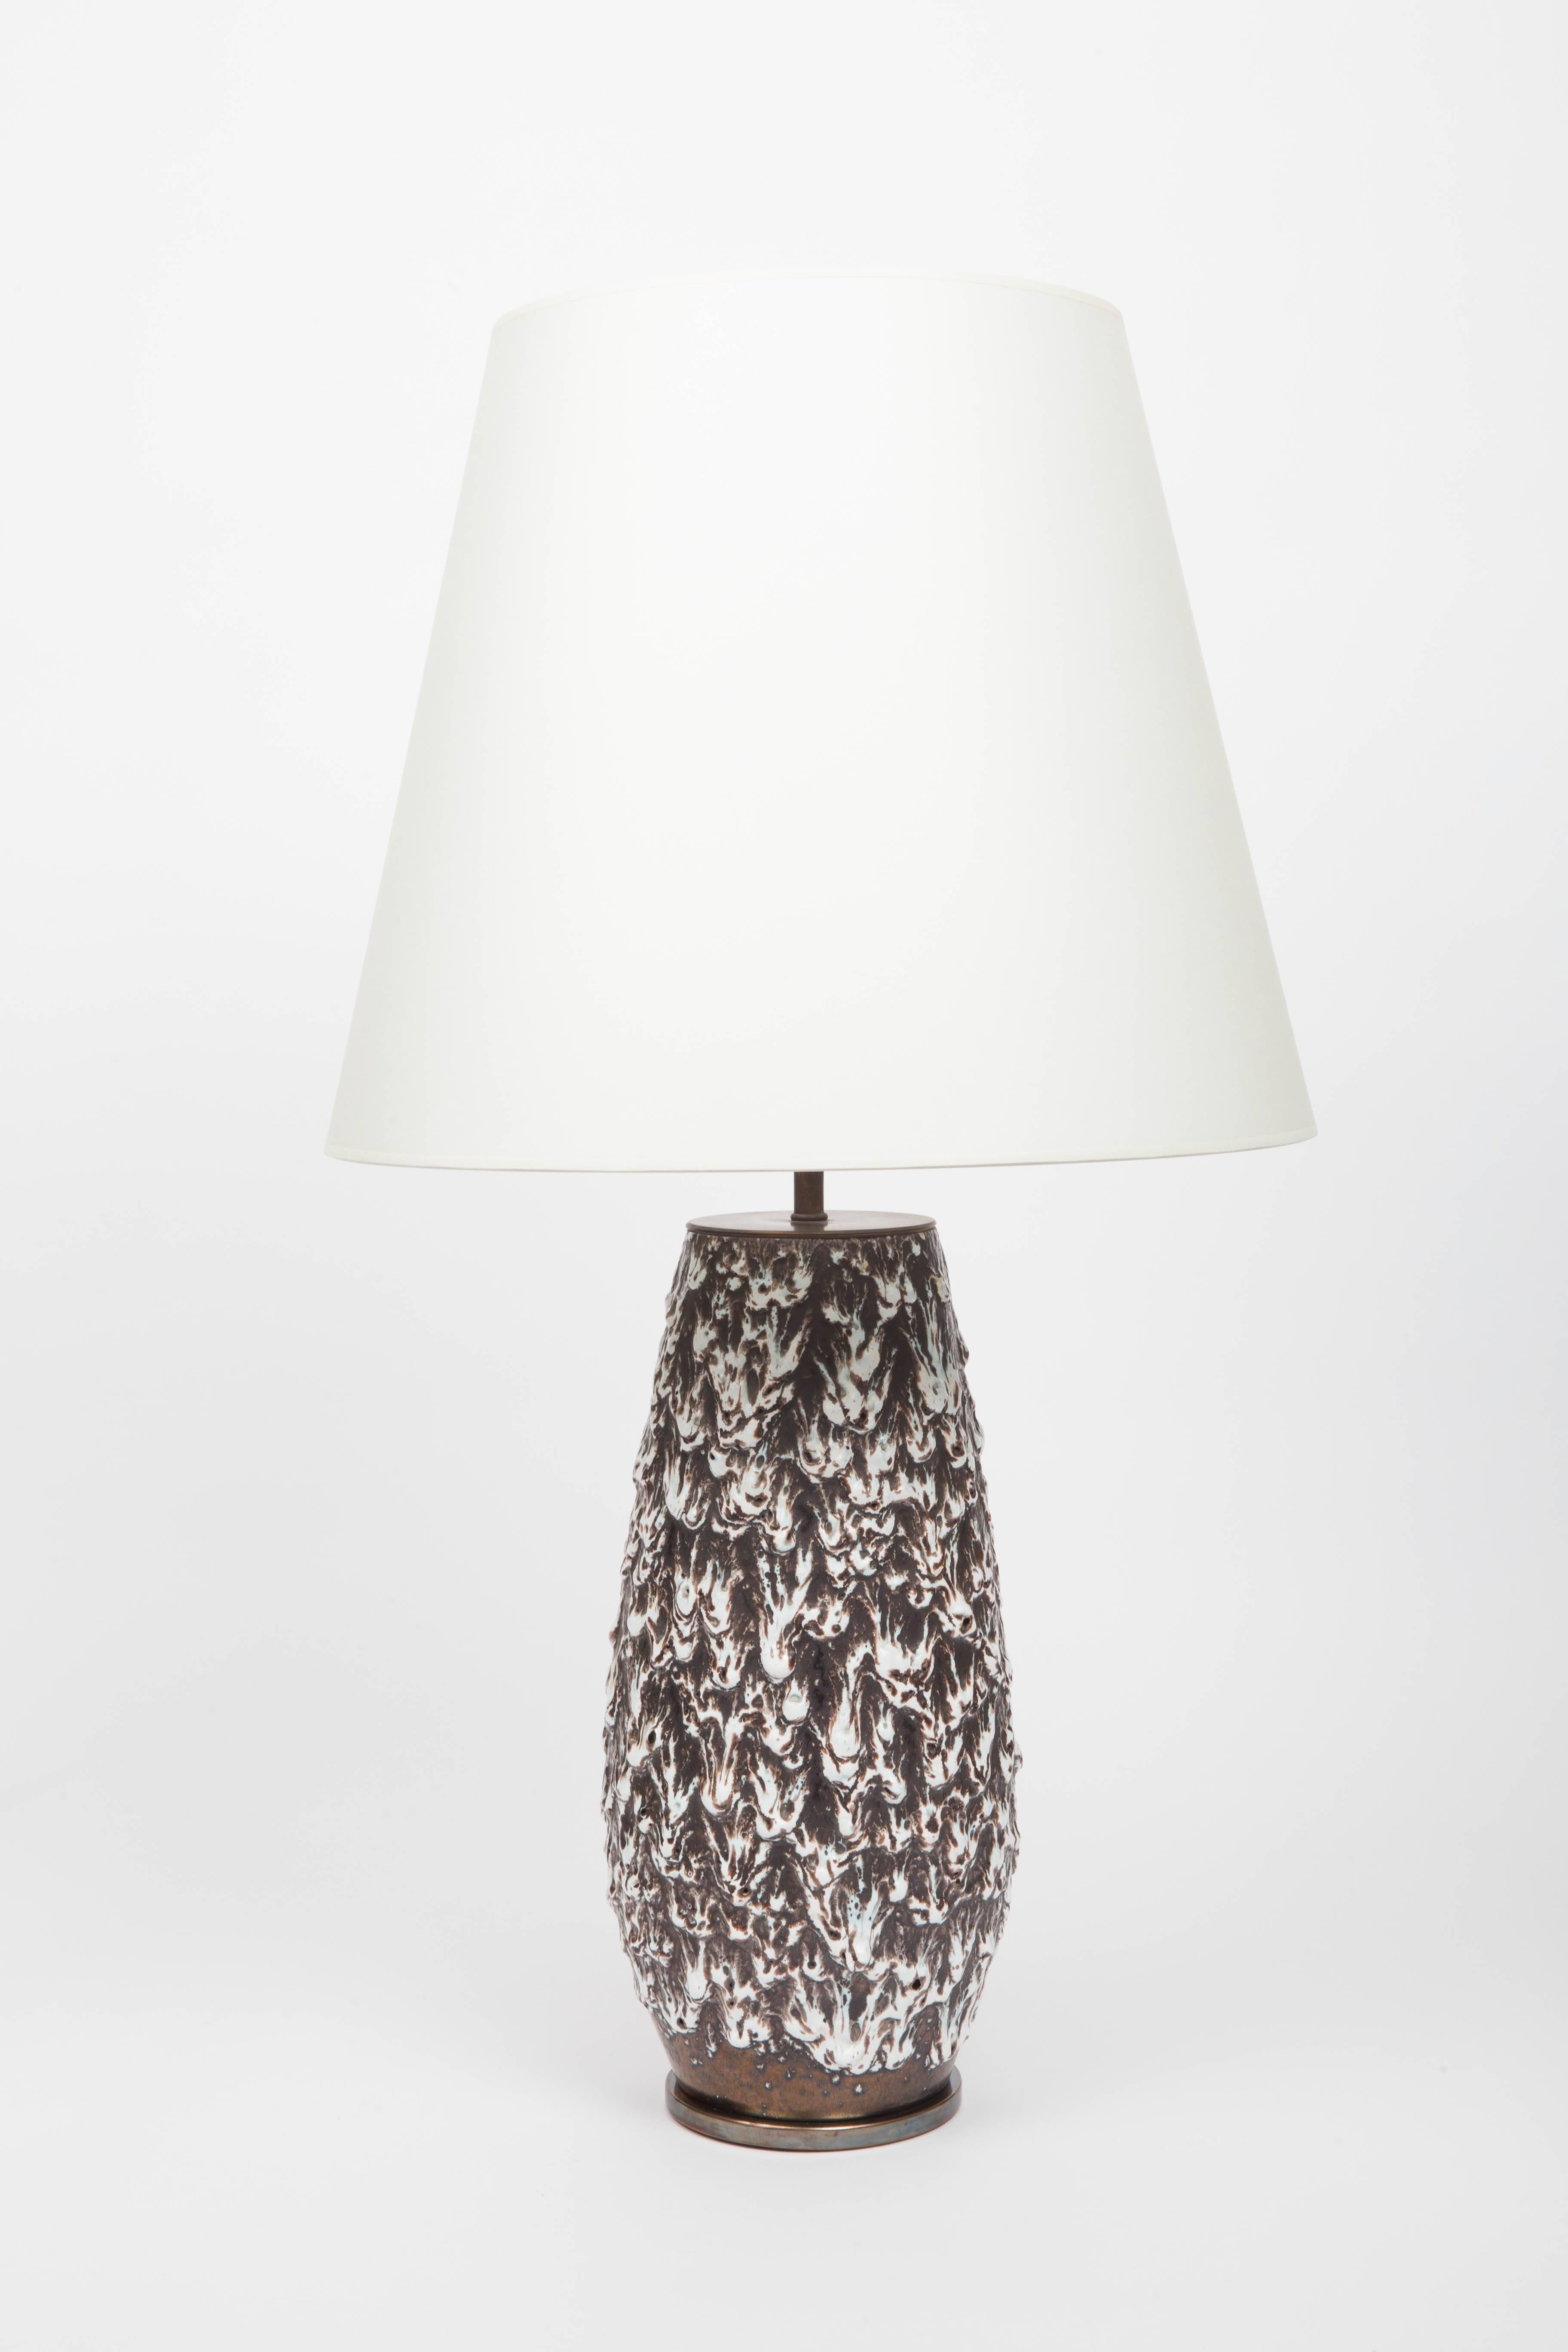 Brown and White Fat Lava Vase Converted into Lamp 1